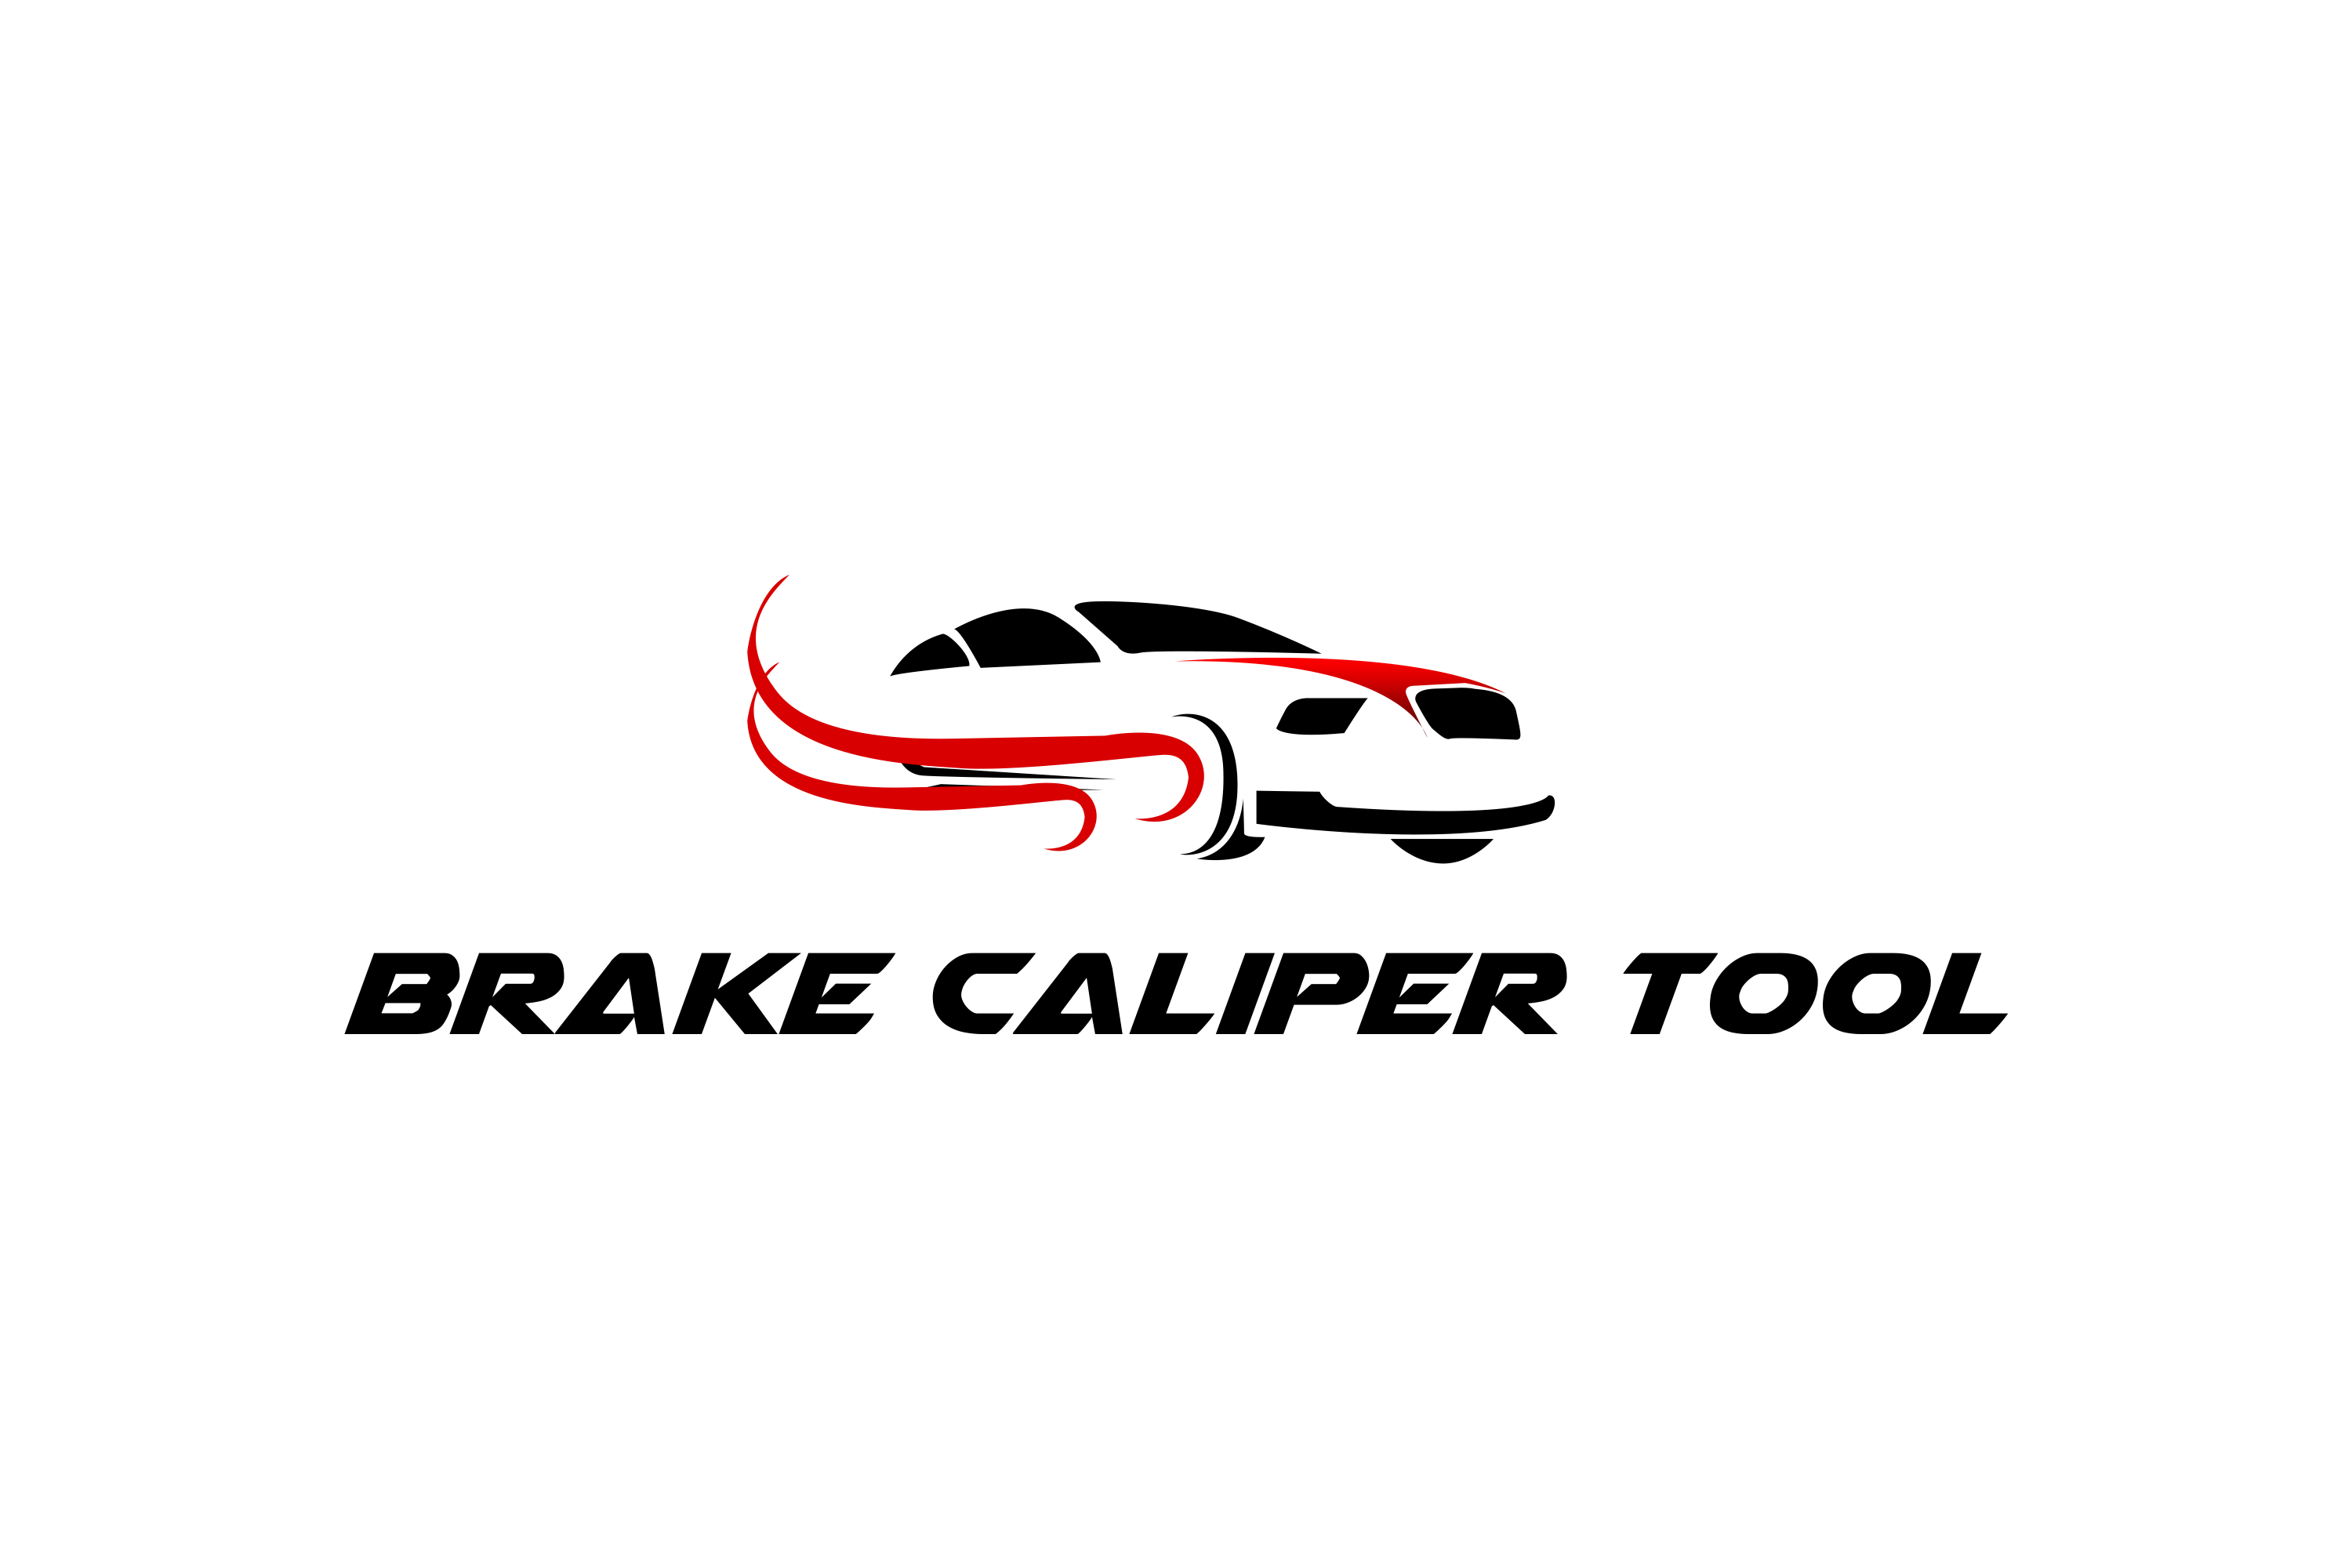 The Brake Caliper Tool is a very useful invention for repairing cars.